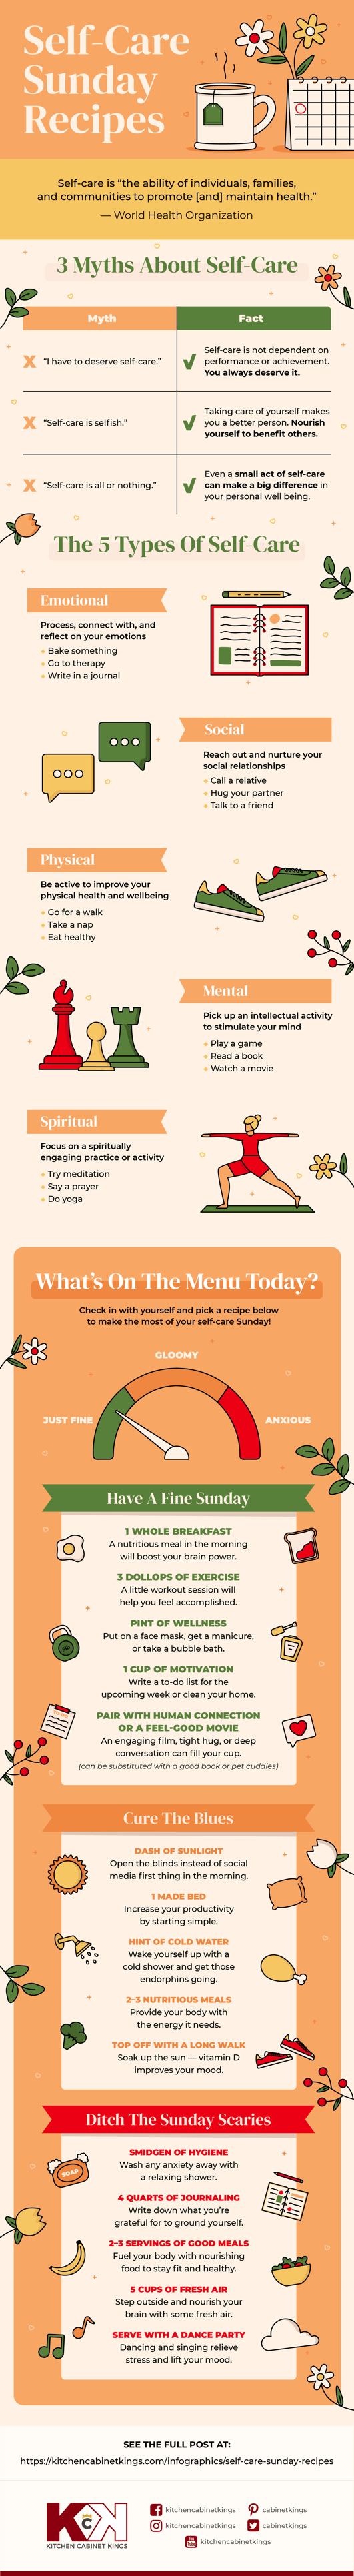 infographic-with-self-care-sunday-recipes